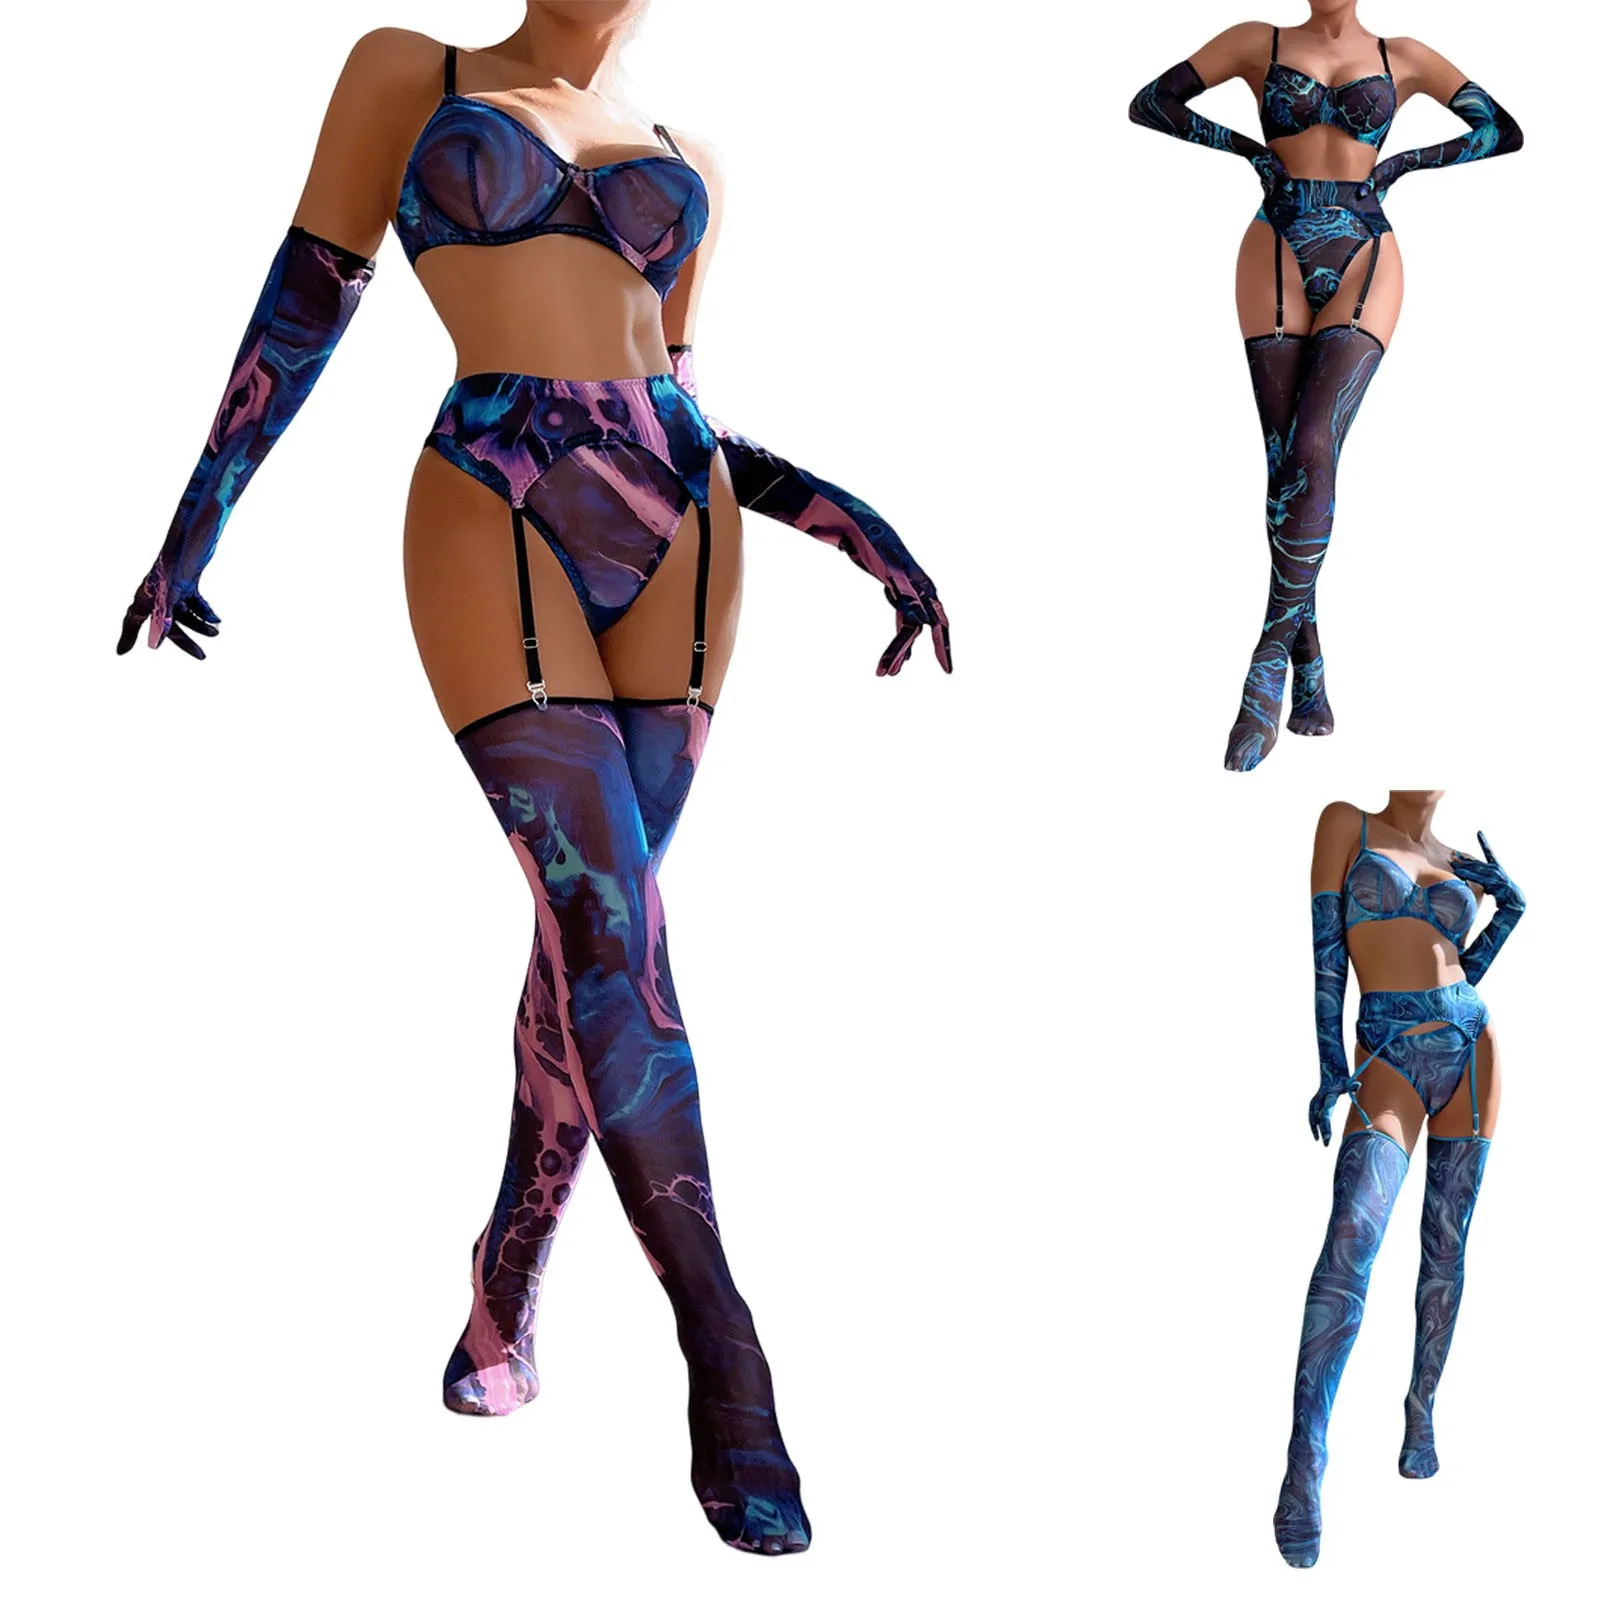 

Women's Five Piece Set Sexy Lace Mesh Printed Chain Linked Garter Teddy Bodysuit Crotchless Bodycon Jumpsuit Femme